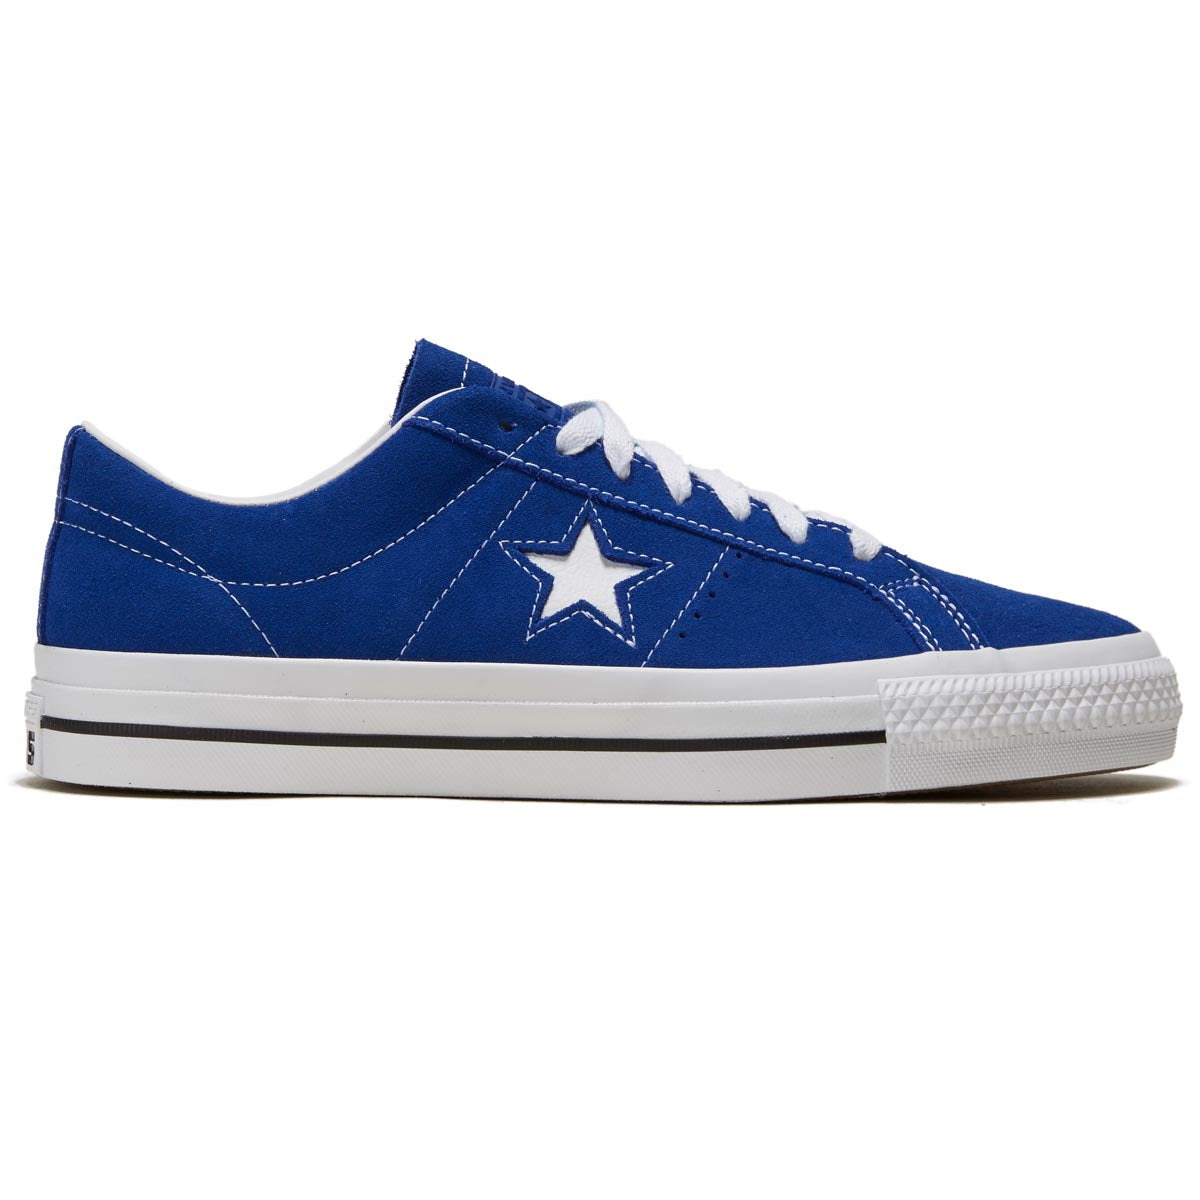 Converse One Star Pro Ox Shoes - Blue/White/Black image 1